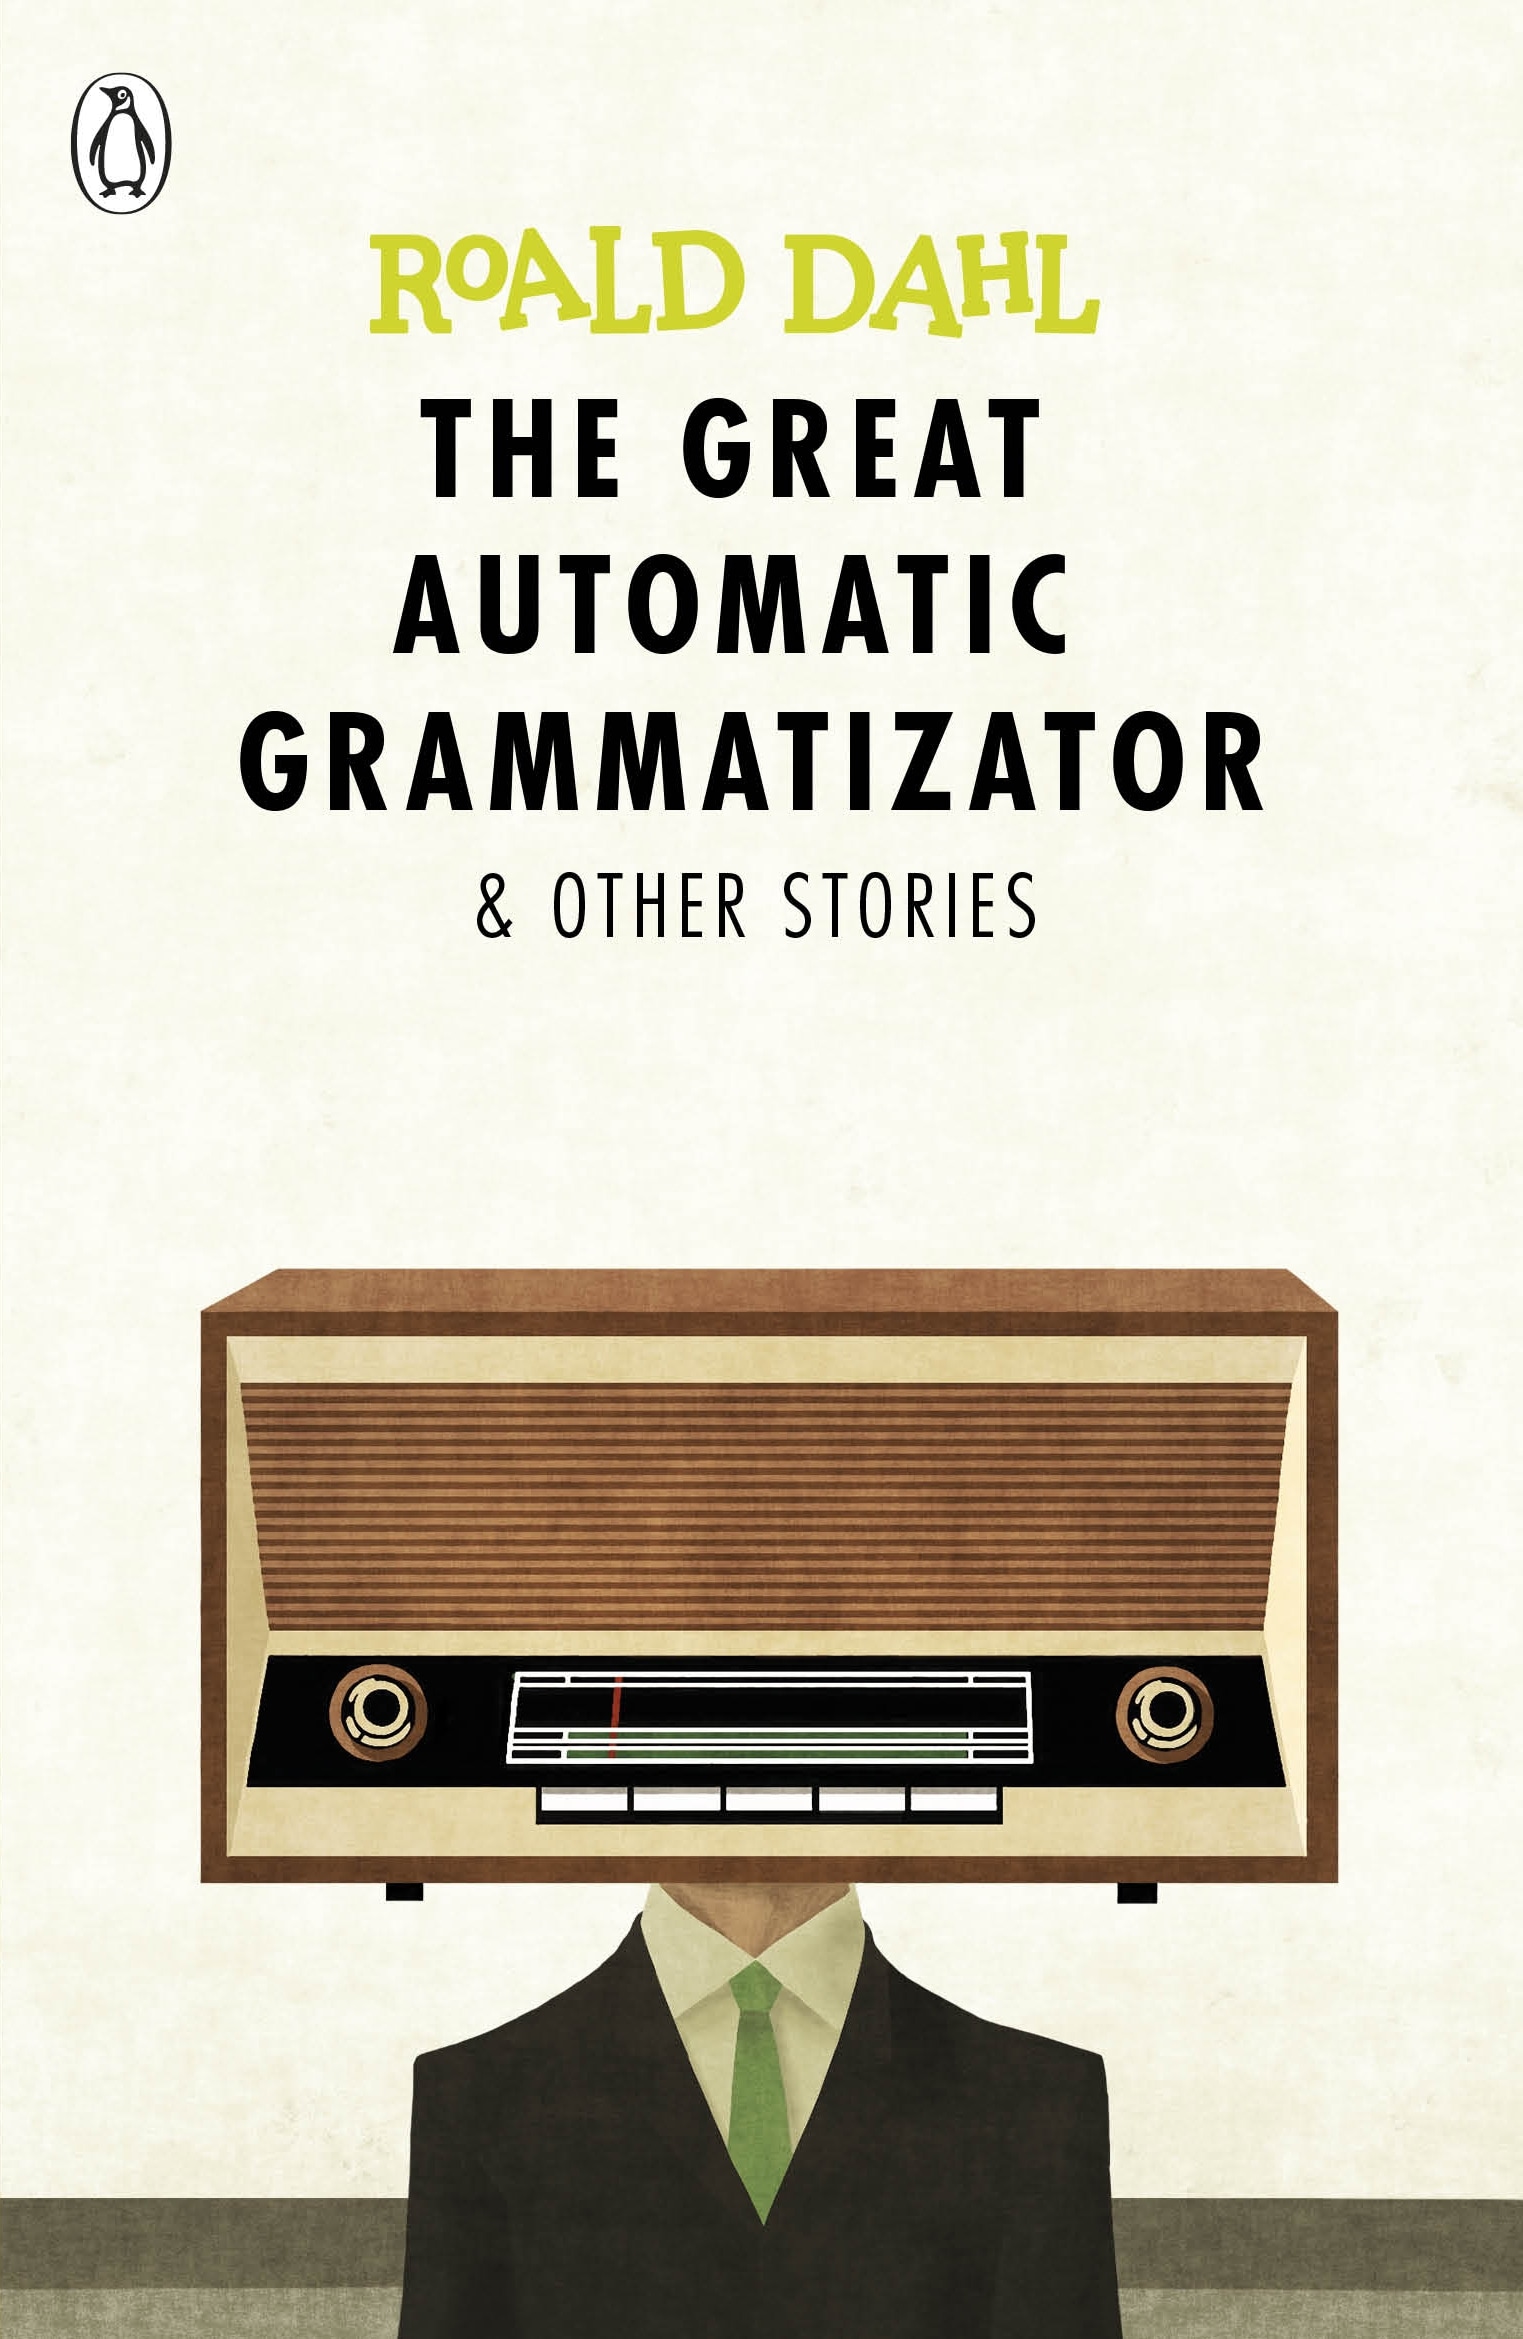 Book “The Great Automatic Grammatizator and Other Stories” by Roald Dahl — May 4, 2017